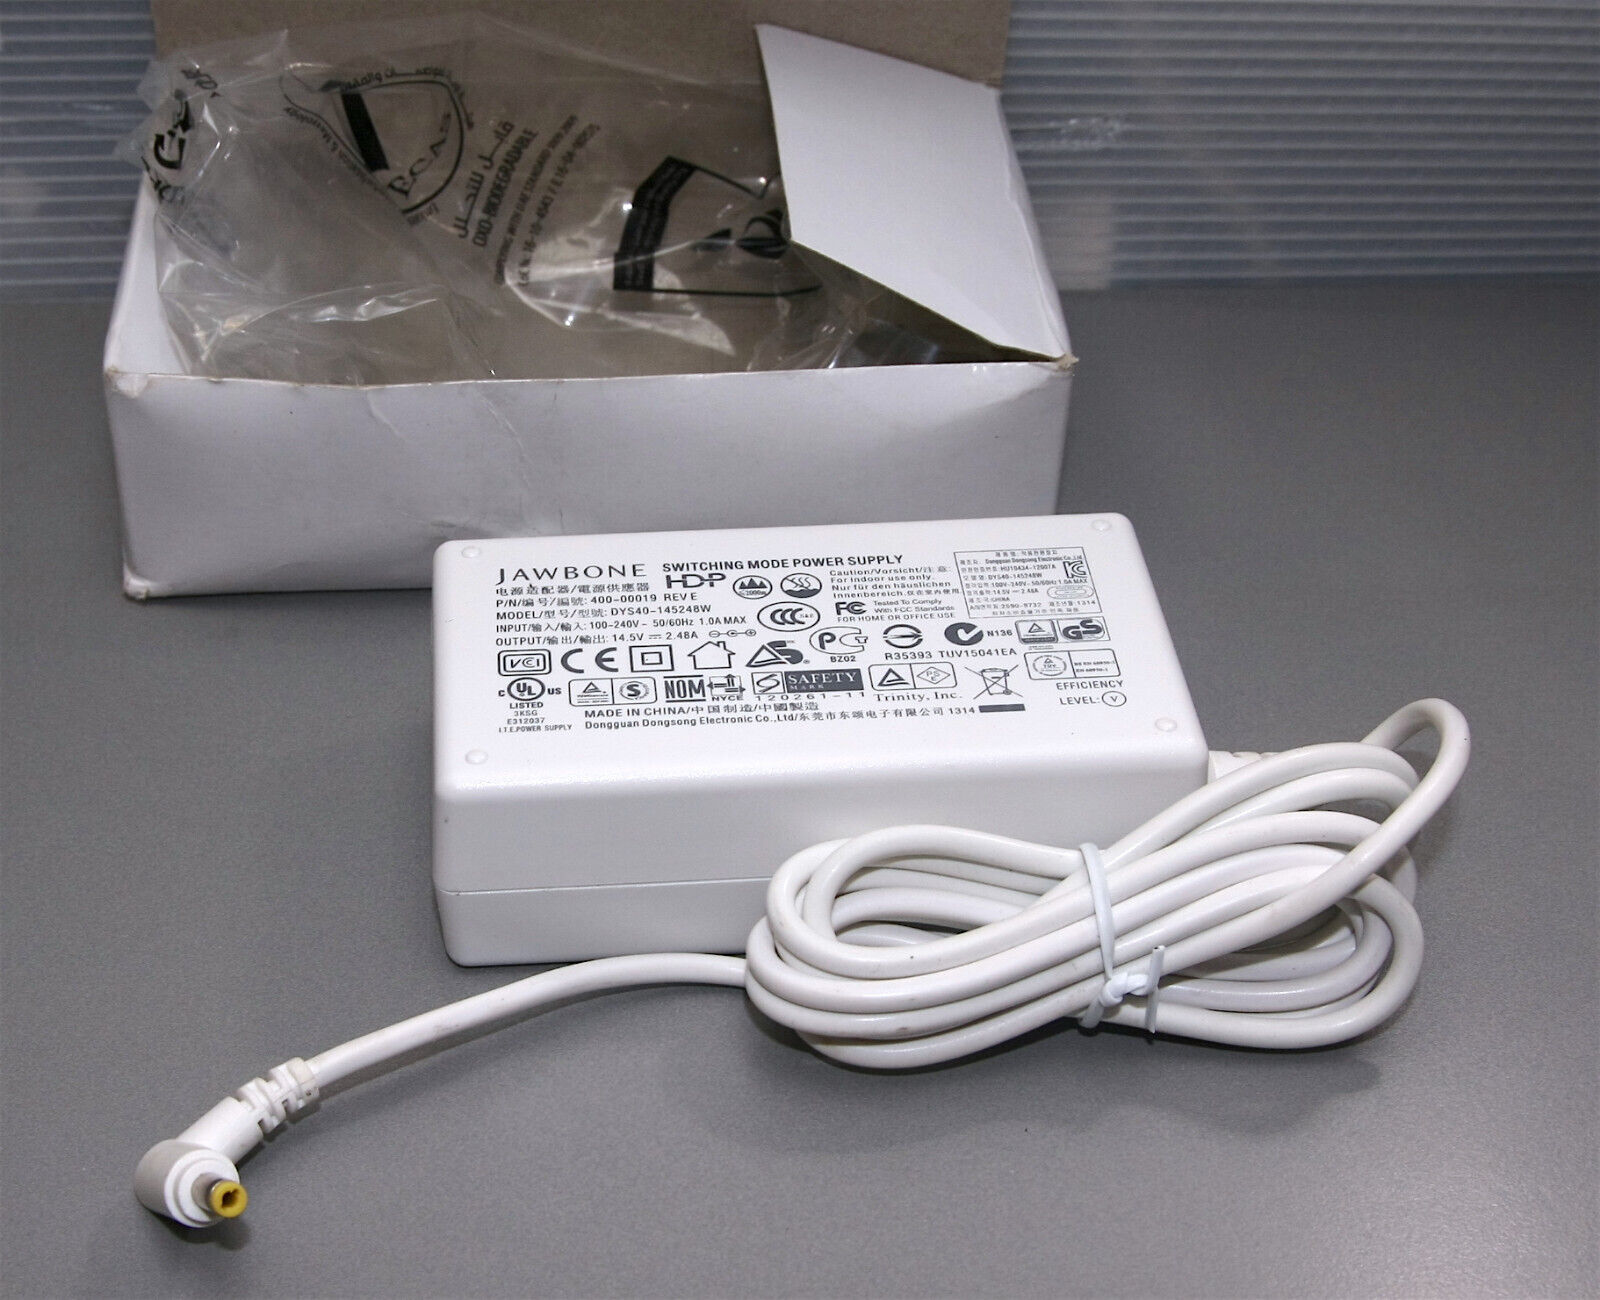 Original NEW NOS Jawbone Power Supply Charger AC Adapter for Big Jambox BT Brand: